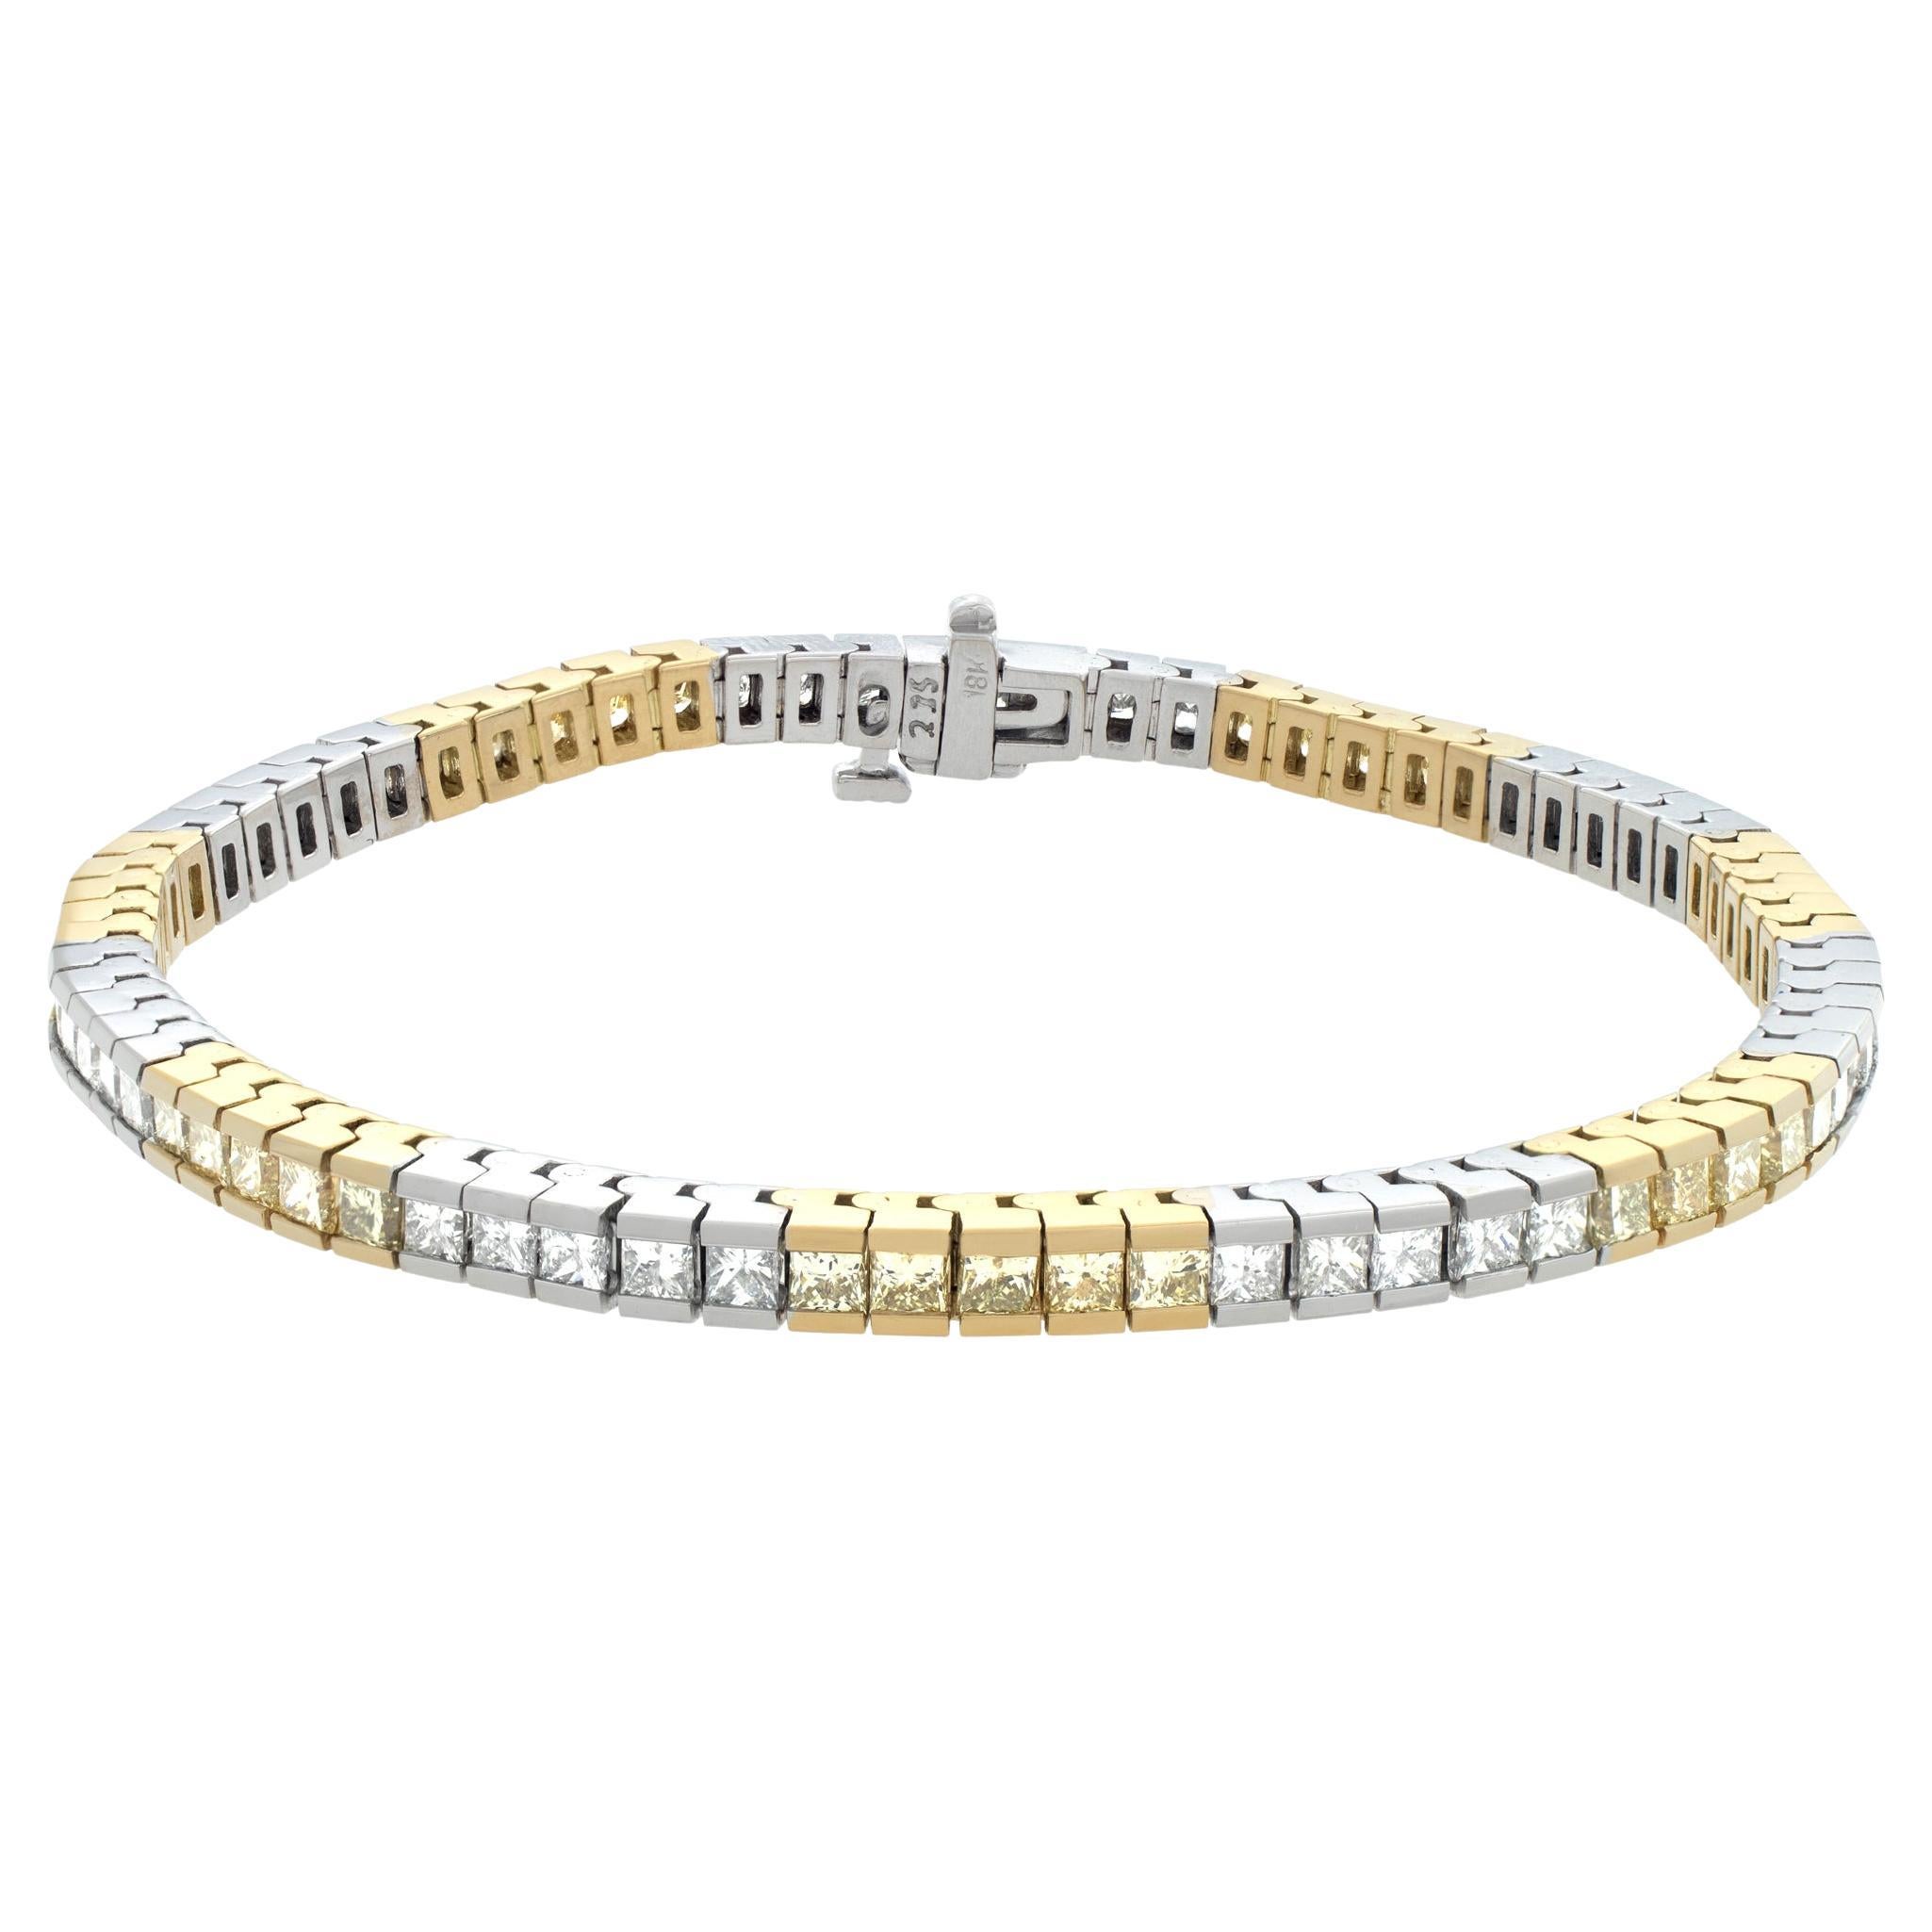 White and yellow gold bracelet with white and yellow diamonds.